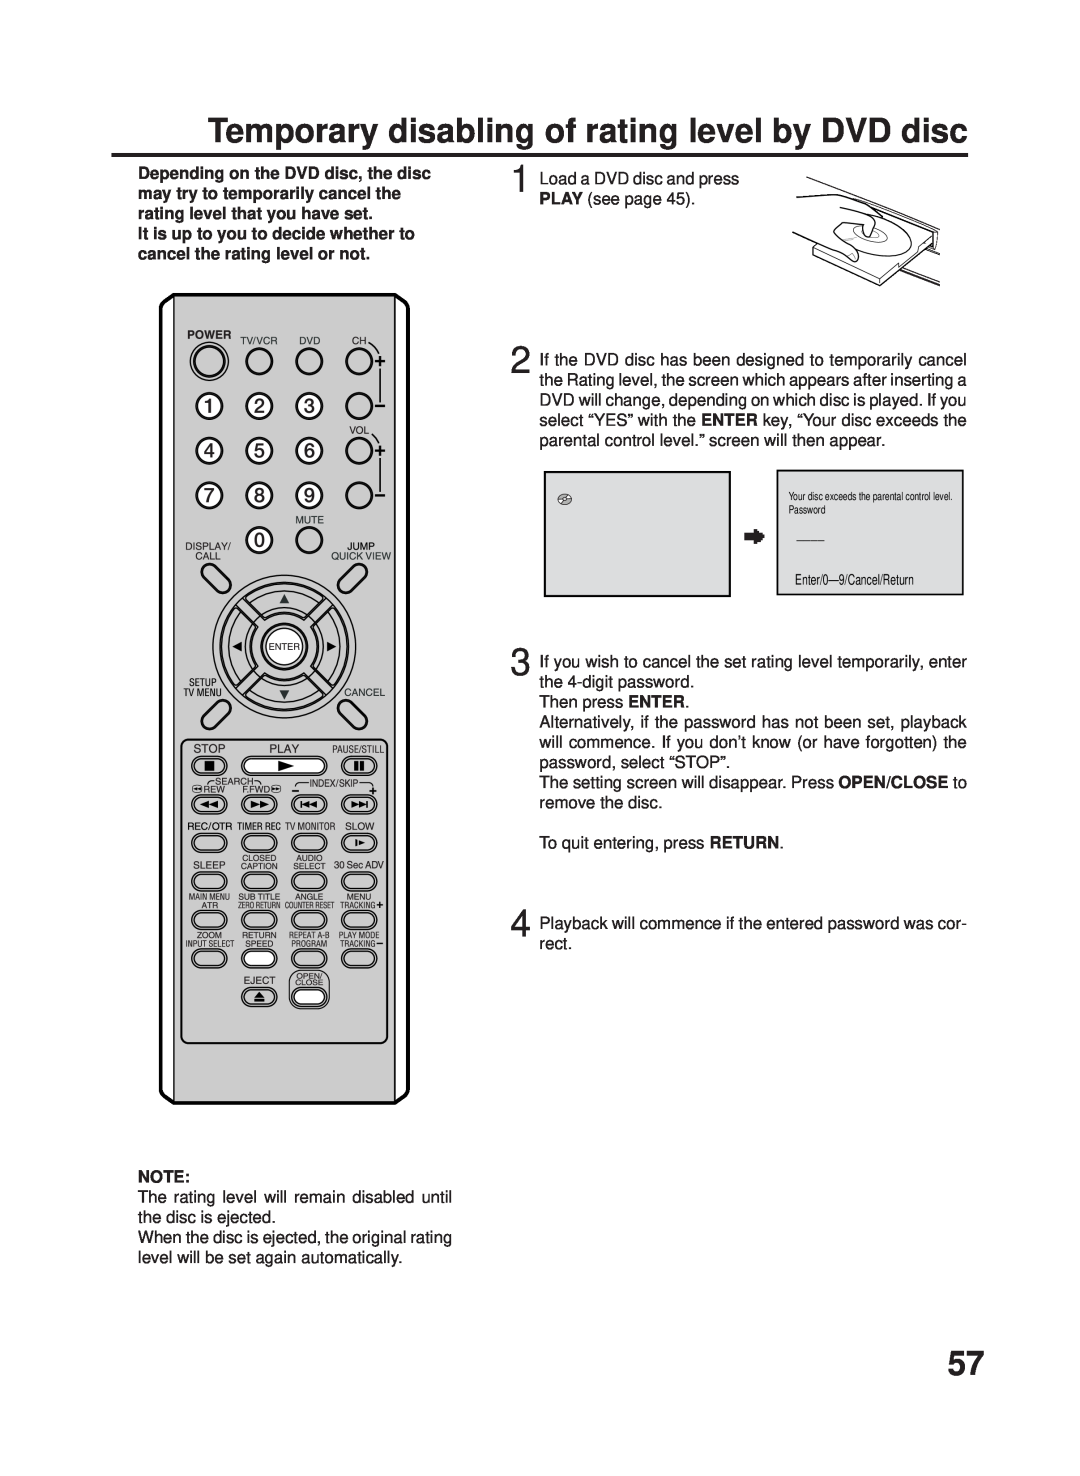 RCA 27F500TDV manual Temporary disabling of rating level by DVD disc 